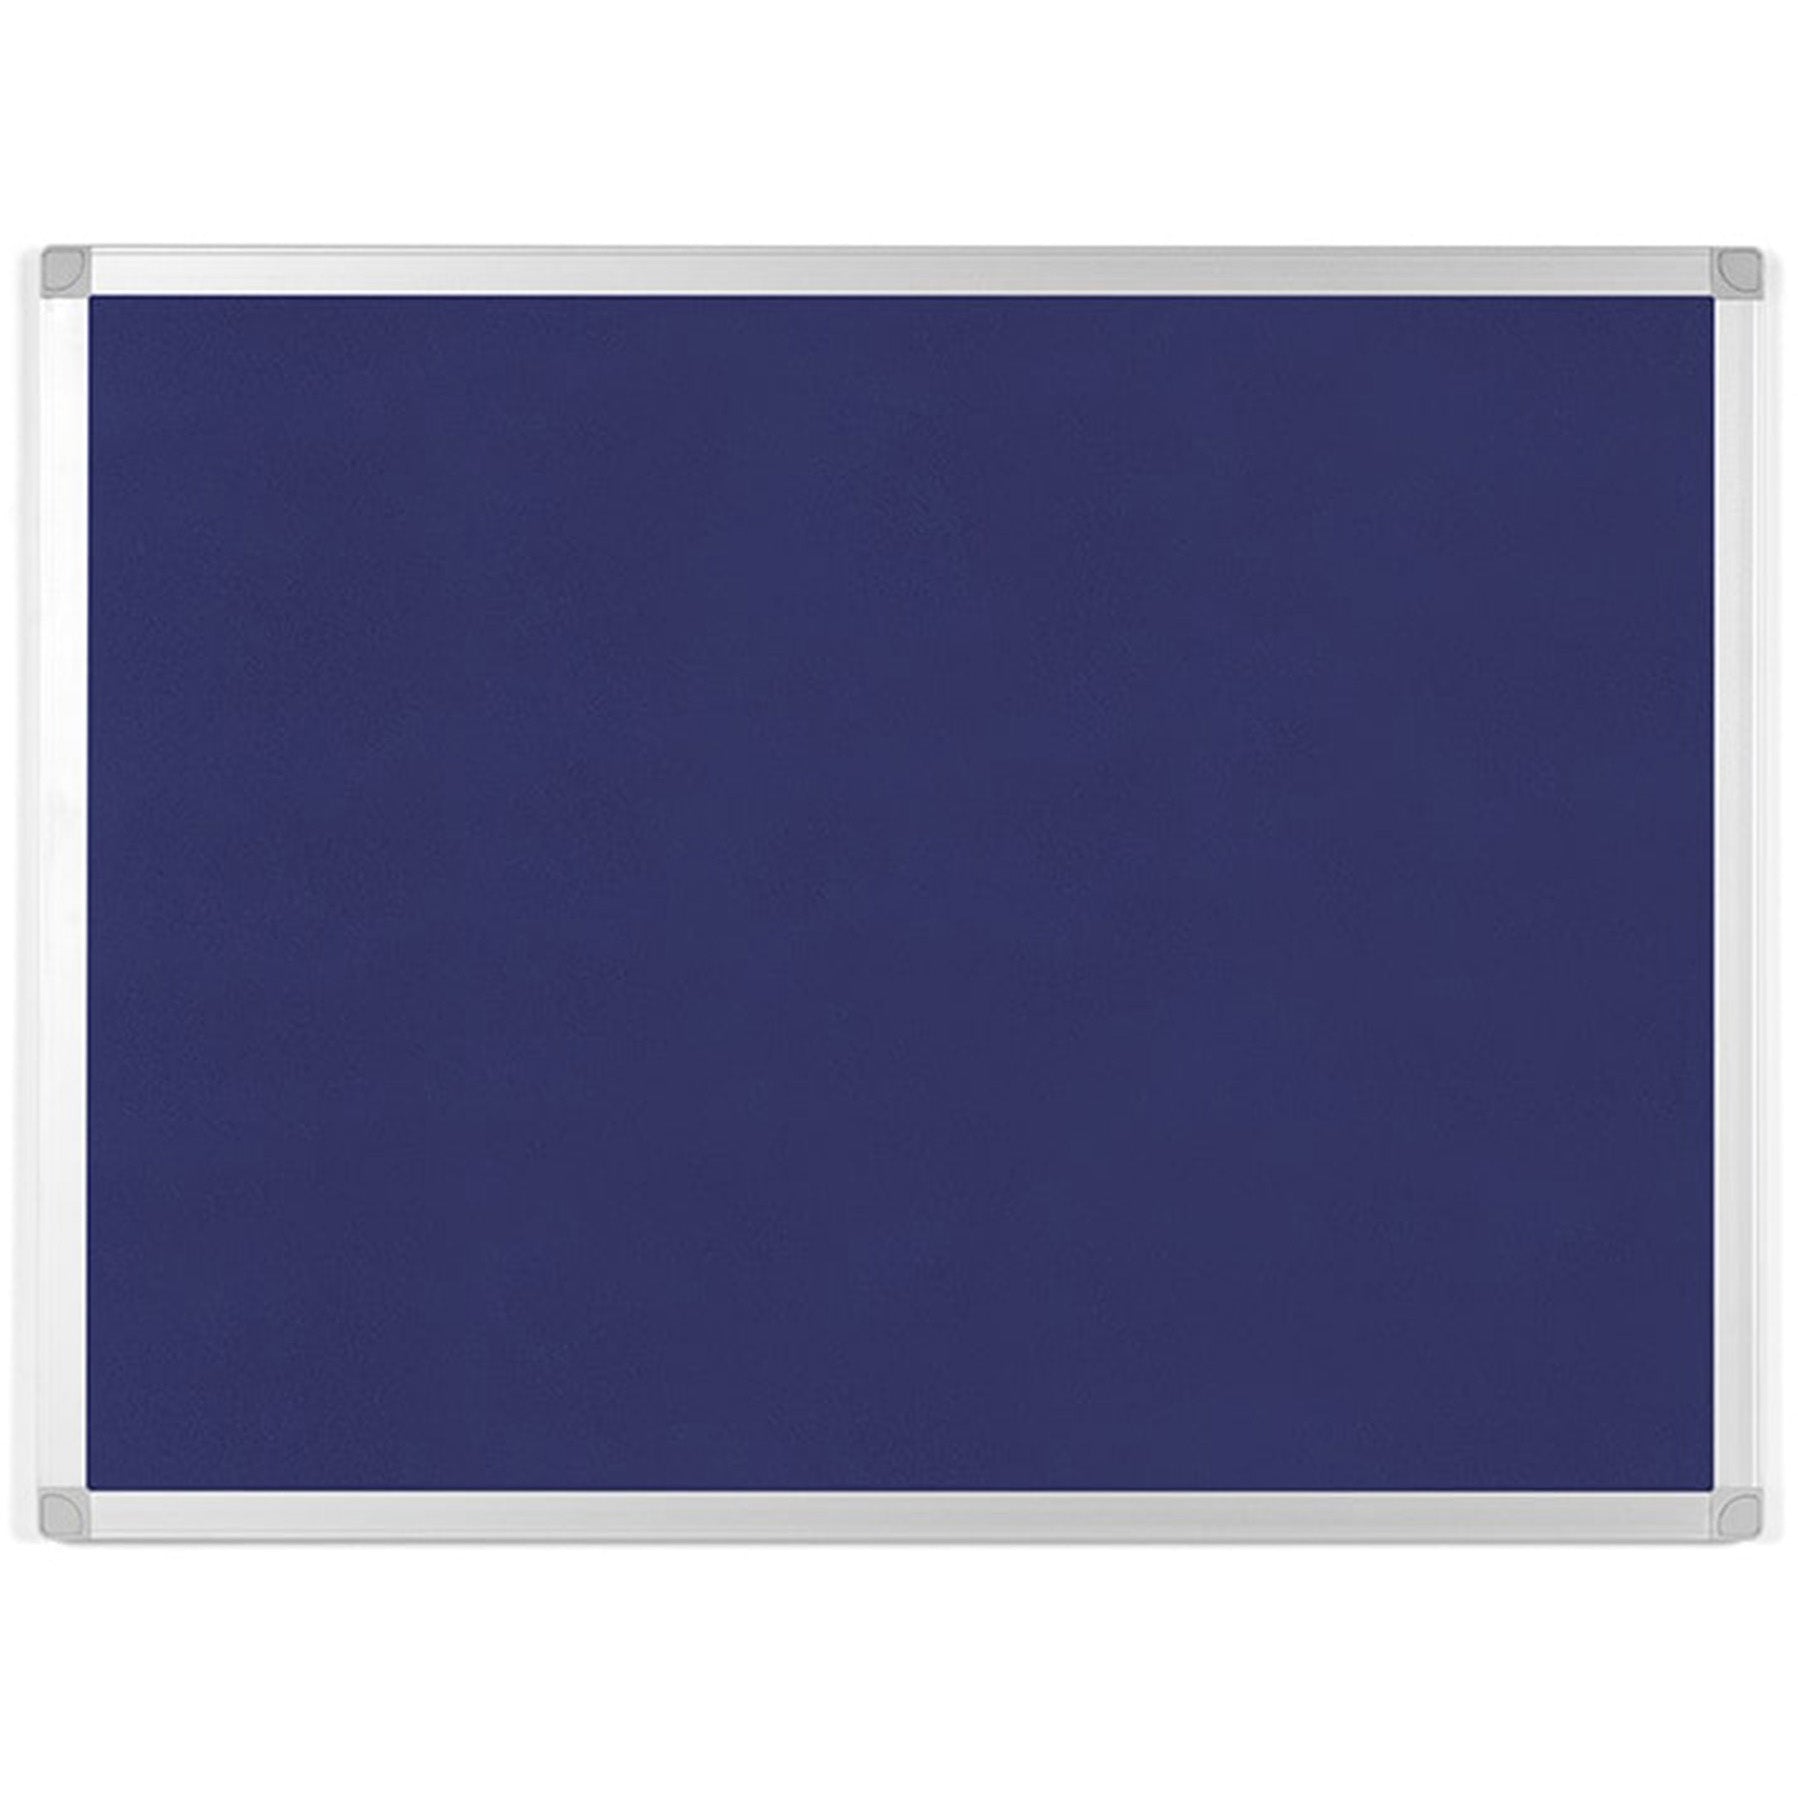 FA03439214 Ayda Wall Mount Push Pin Bulletin Board, 24" x 36", Blue Felt, Aluminum Frame, for Home or Office by MasterVision